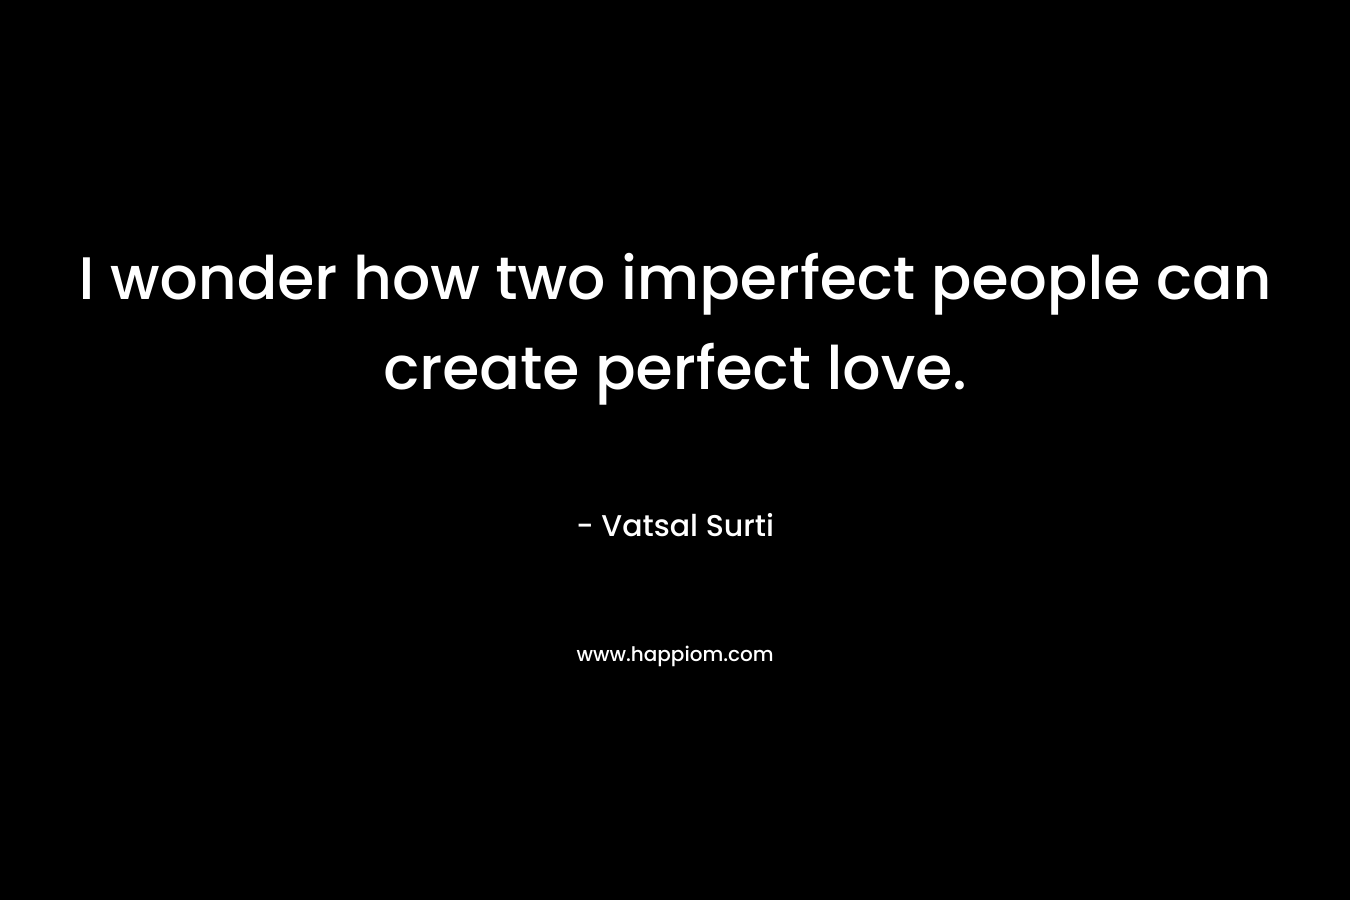 I wonder how two imperfect people can create perfect love.